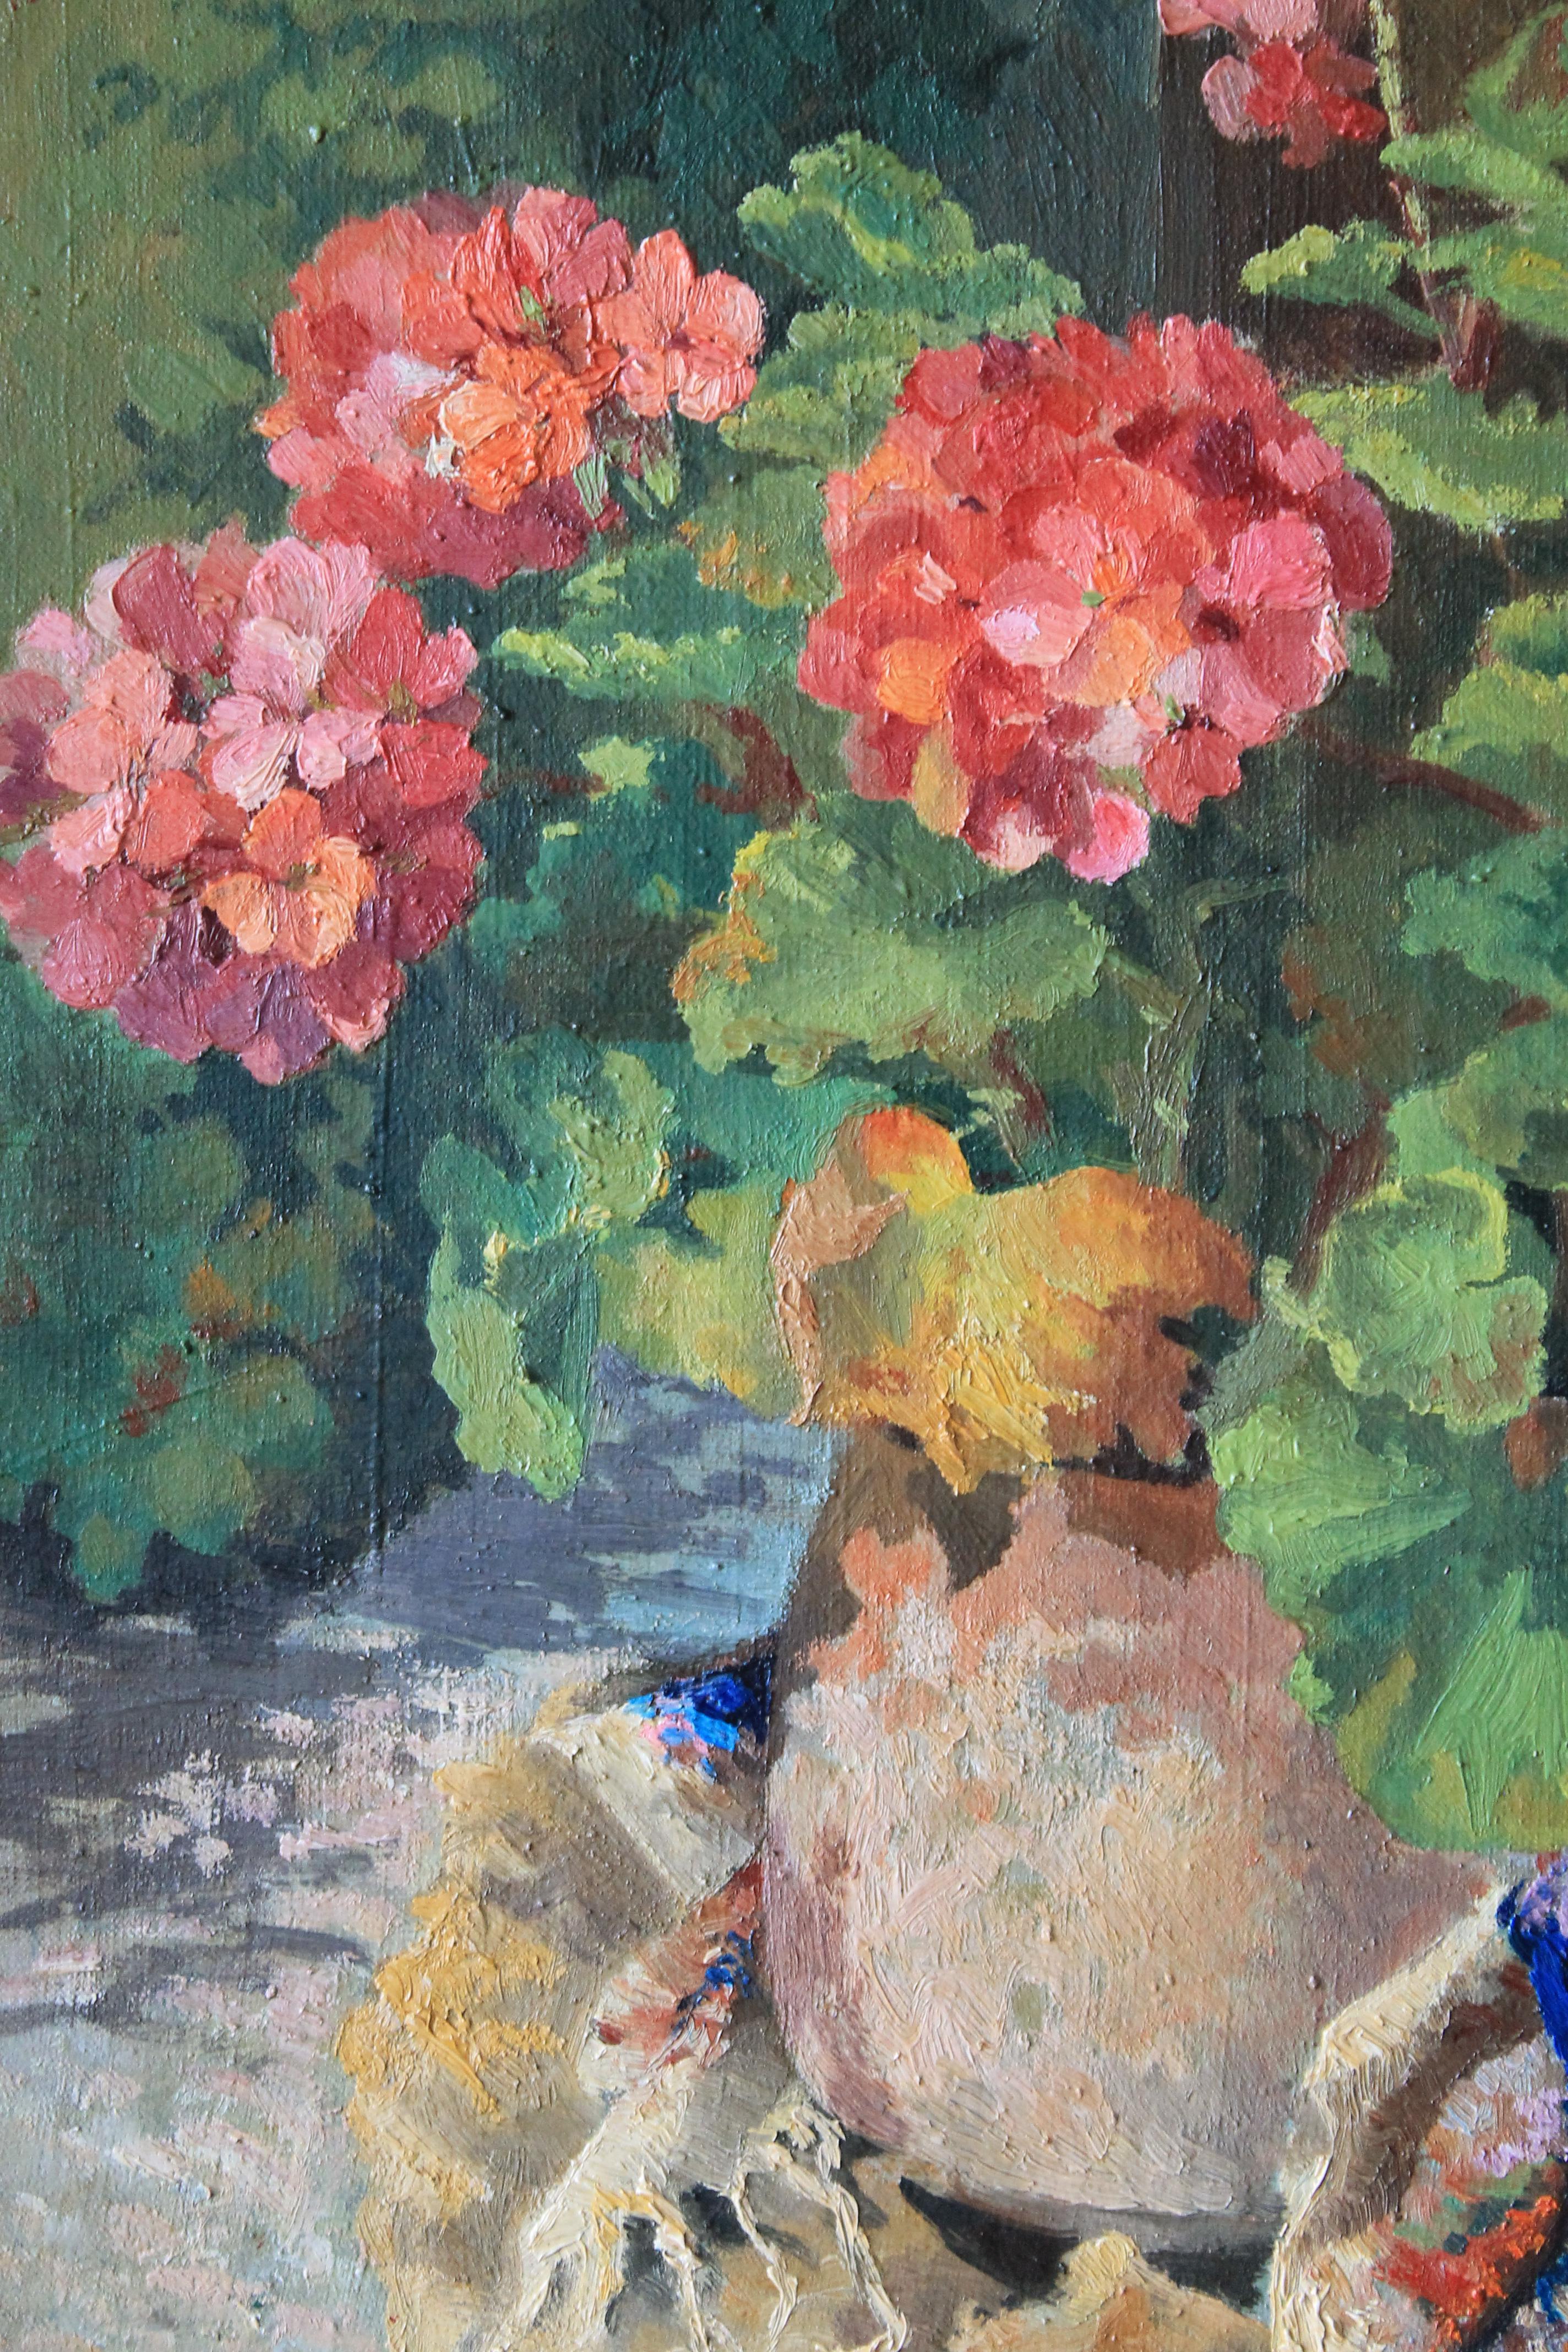 Delightful vintage oil painting on stretched canvas of geraniums in an old terracotta or clay pot, signed in the lower right corner and in it's original frame.  Impressionist geraniums in tones of pinks and reds dance over the canvas amidst gorgeous